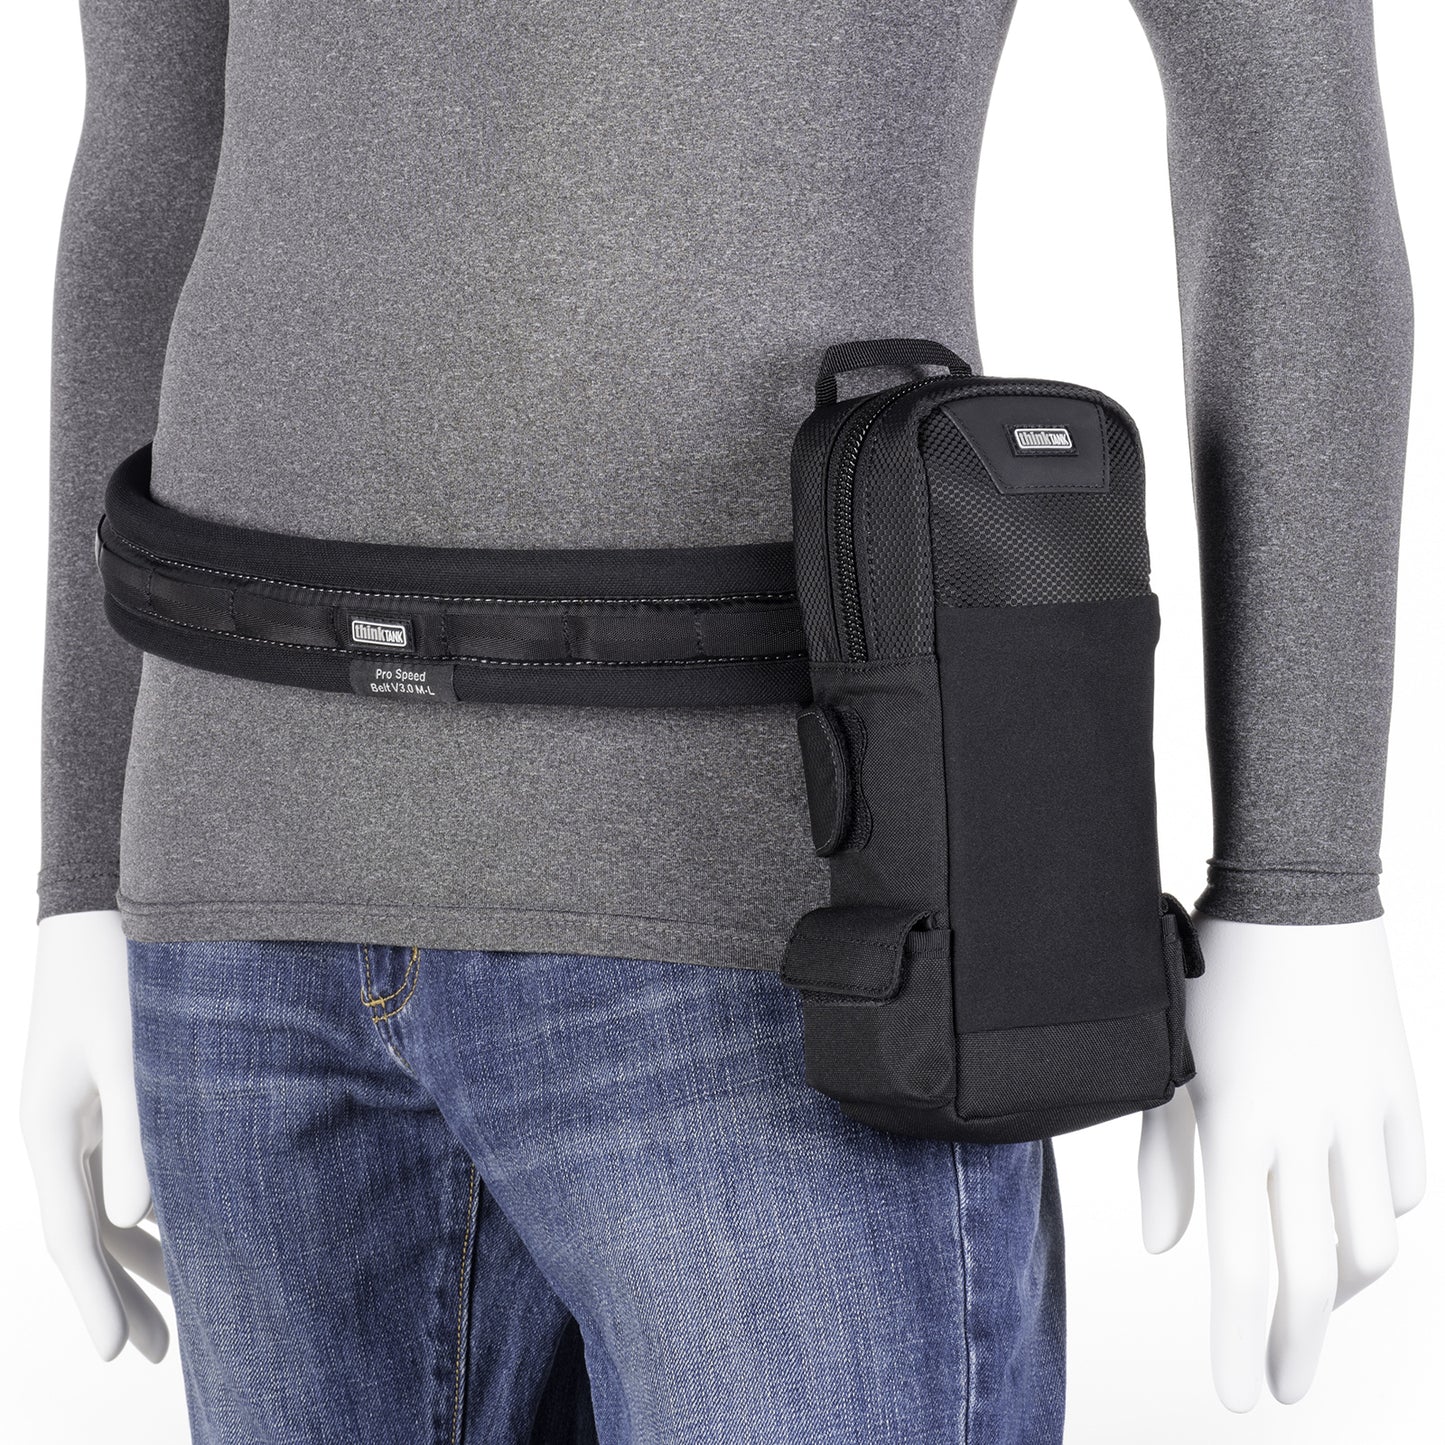 Attaches to any Think Tank belt (sold separately)